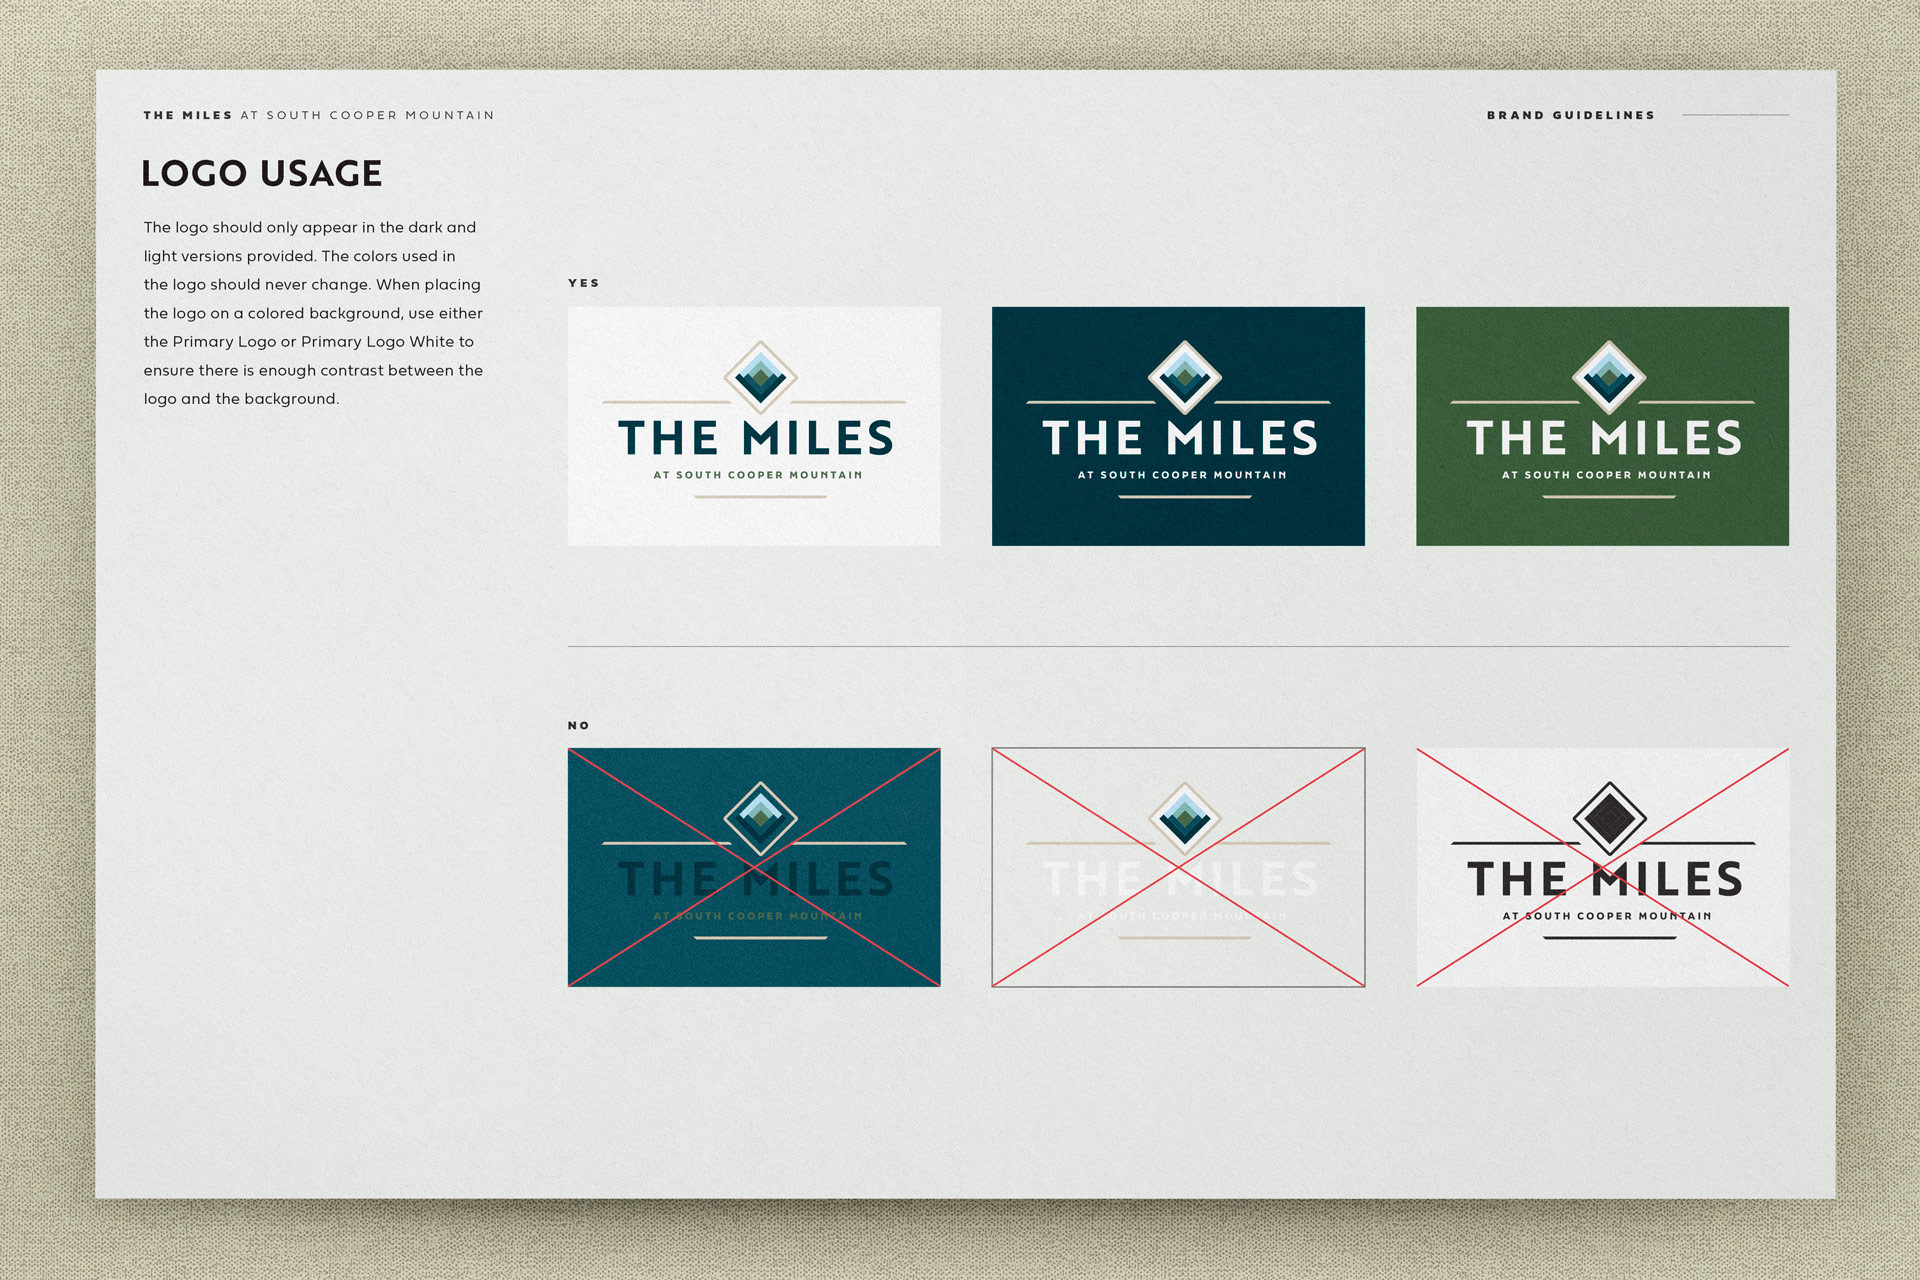 The Miles at South Cooper Mountain brand book showing the logo created by Incubate Design